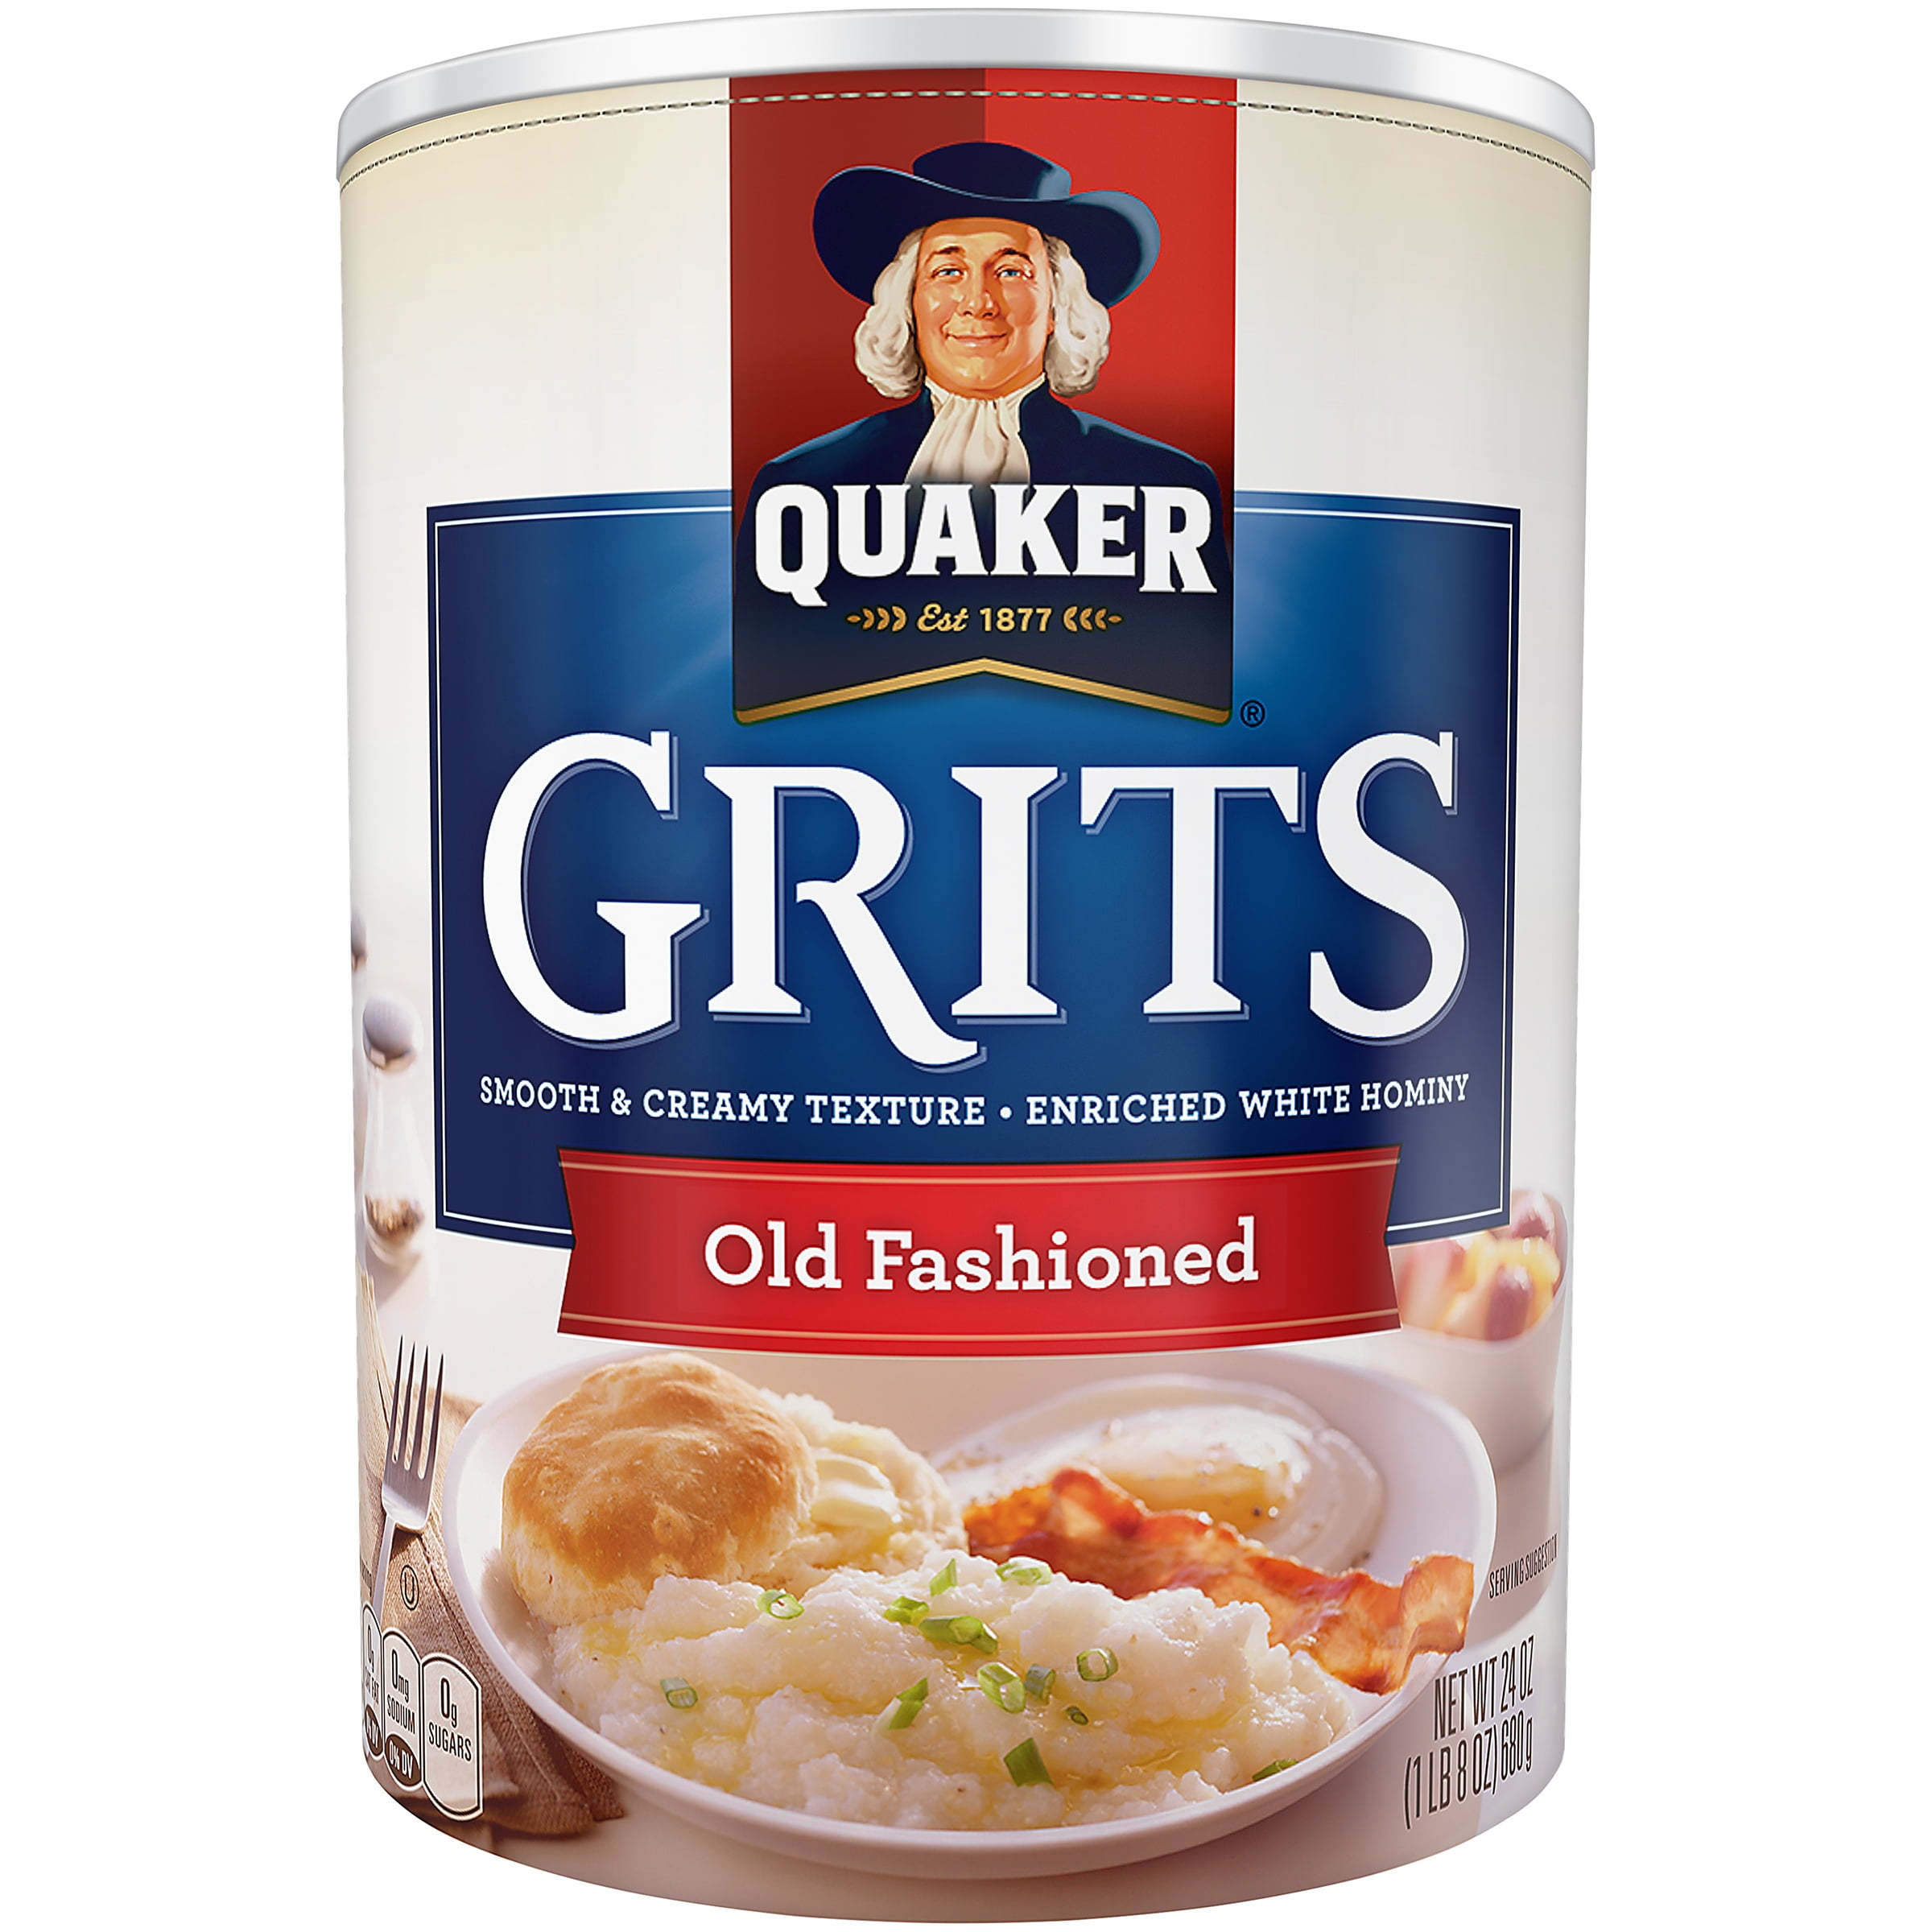 Quaker Old Fashioned Grits 24 Oz Canister Walmart focus for Amazing Quaker Old Fashioned Oats – Perfect Image Reference